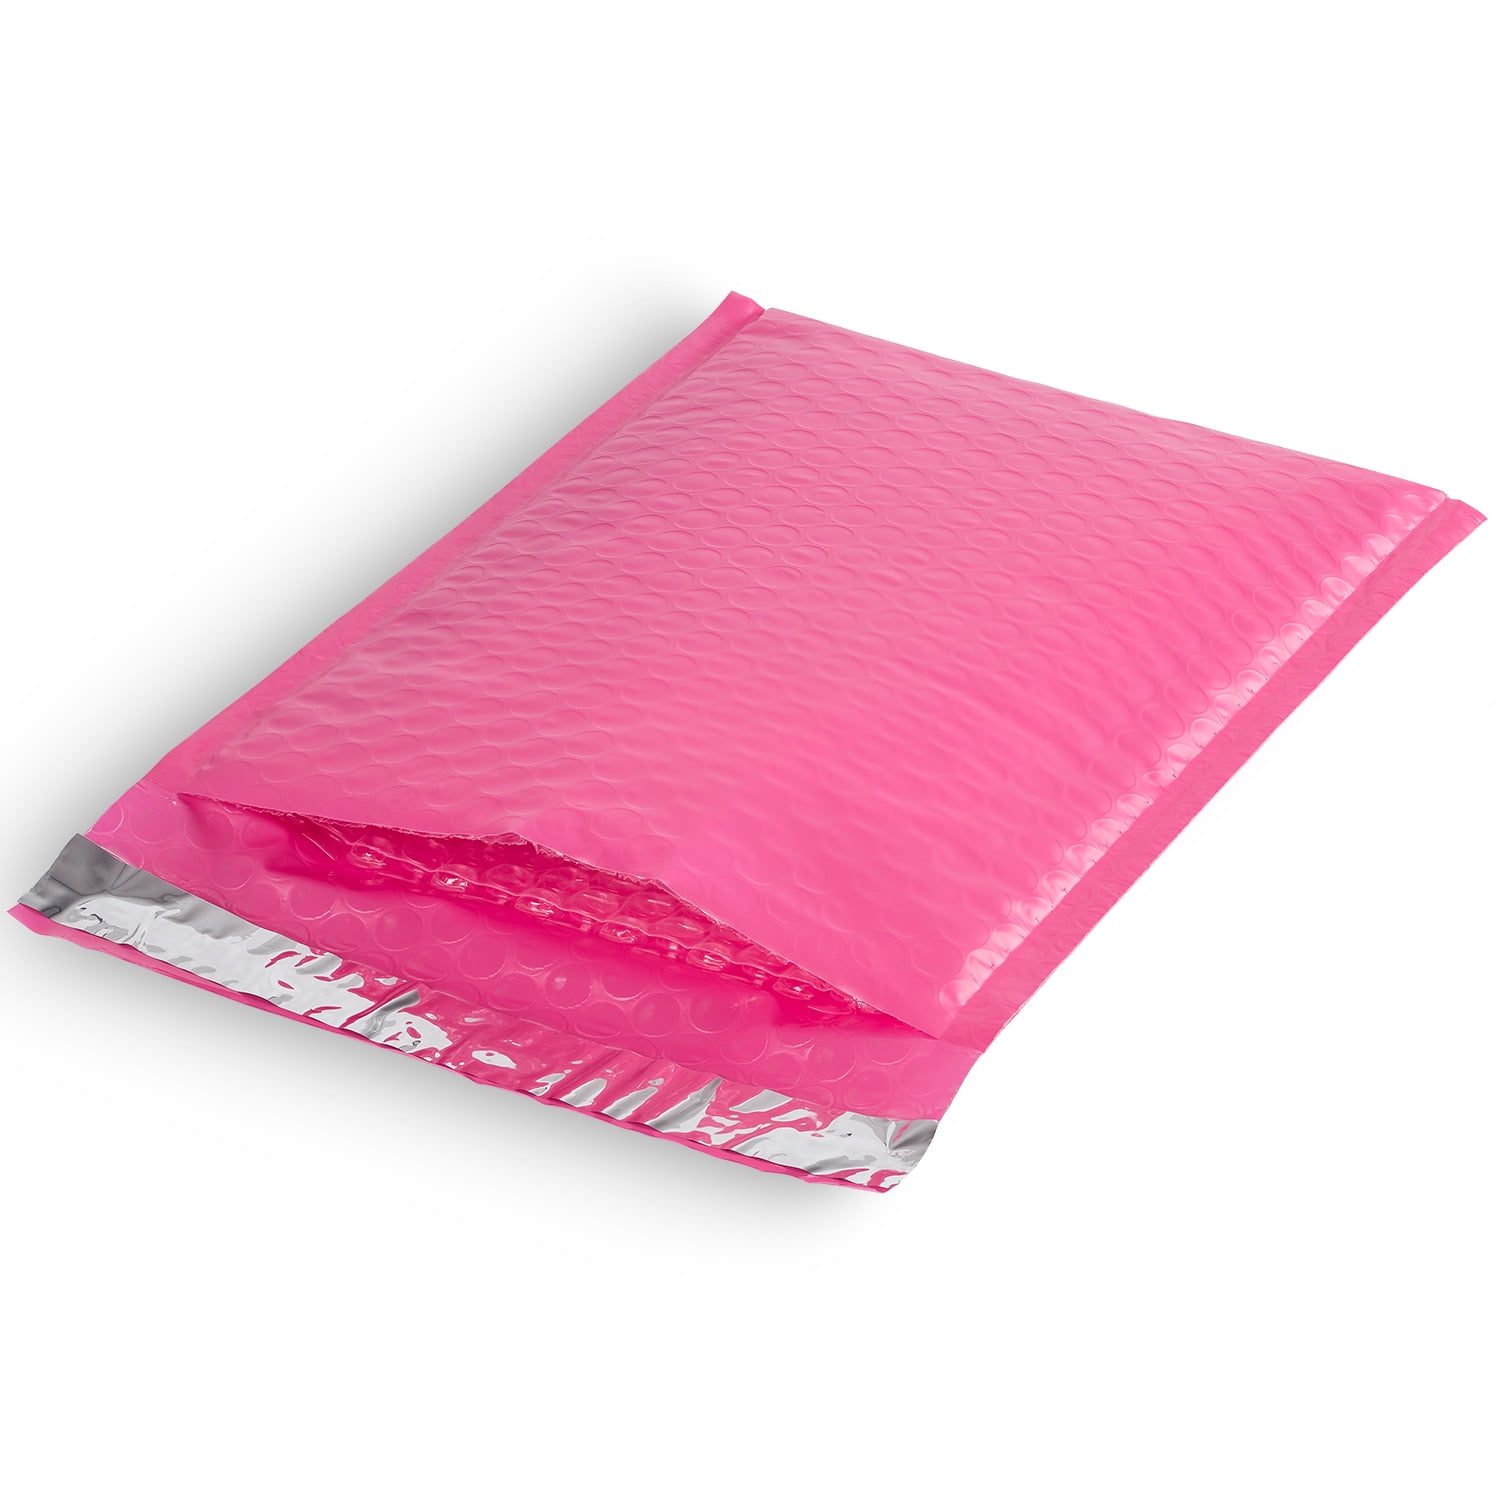 300 Mix 10x13 Poly Mailers Variety Pack 50 ea 